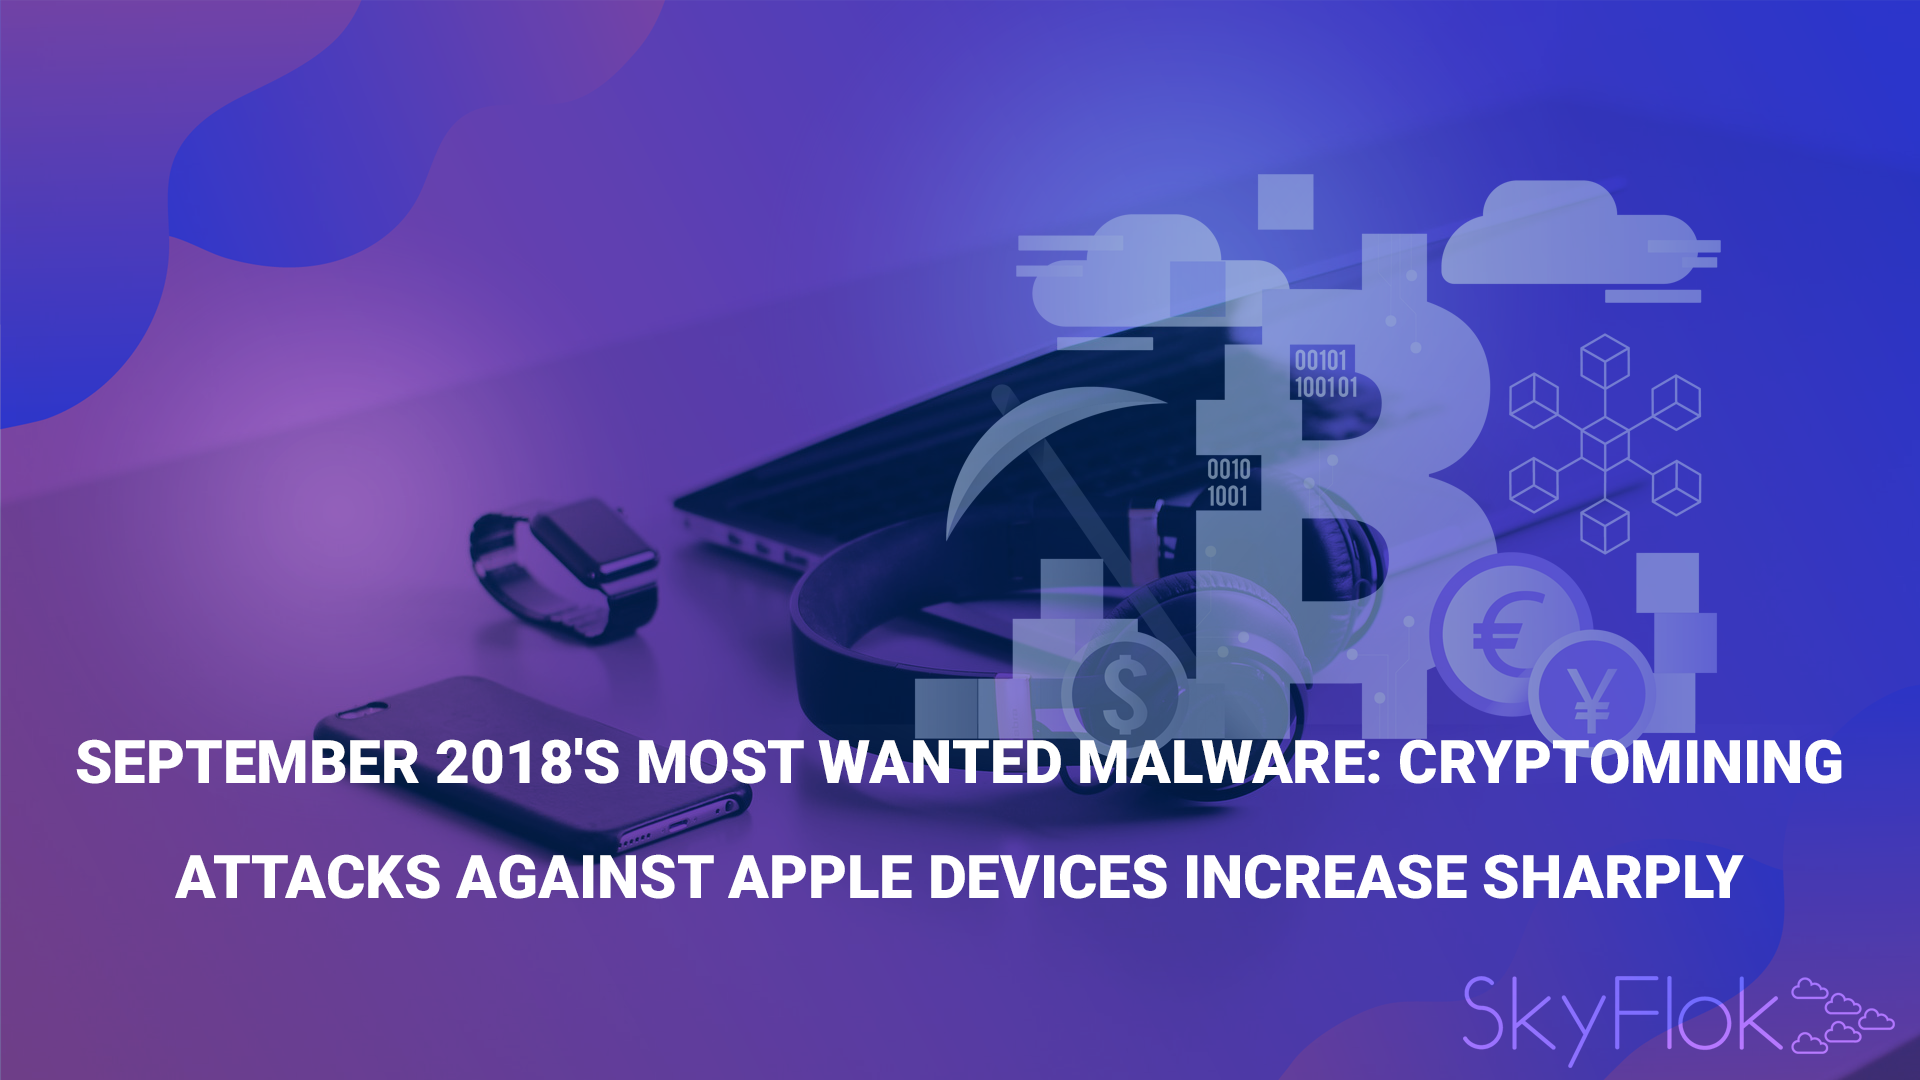 September 2018’s Most Wanted Malware: Cryptomining Attacks Against Apple Devices Increase Sharply